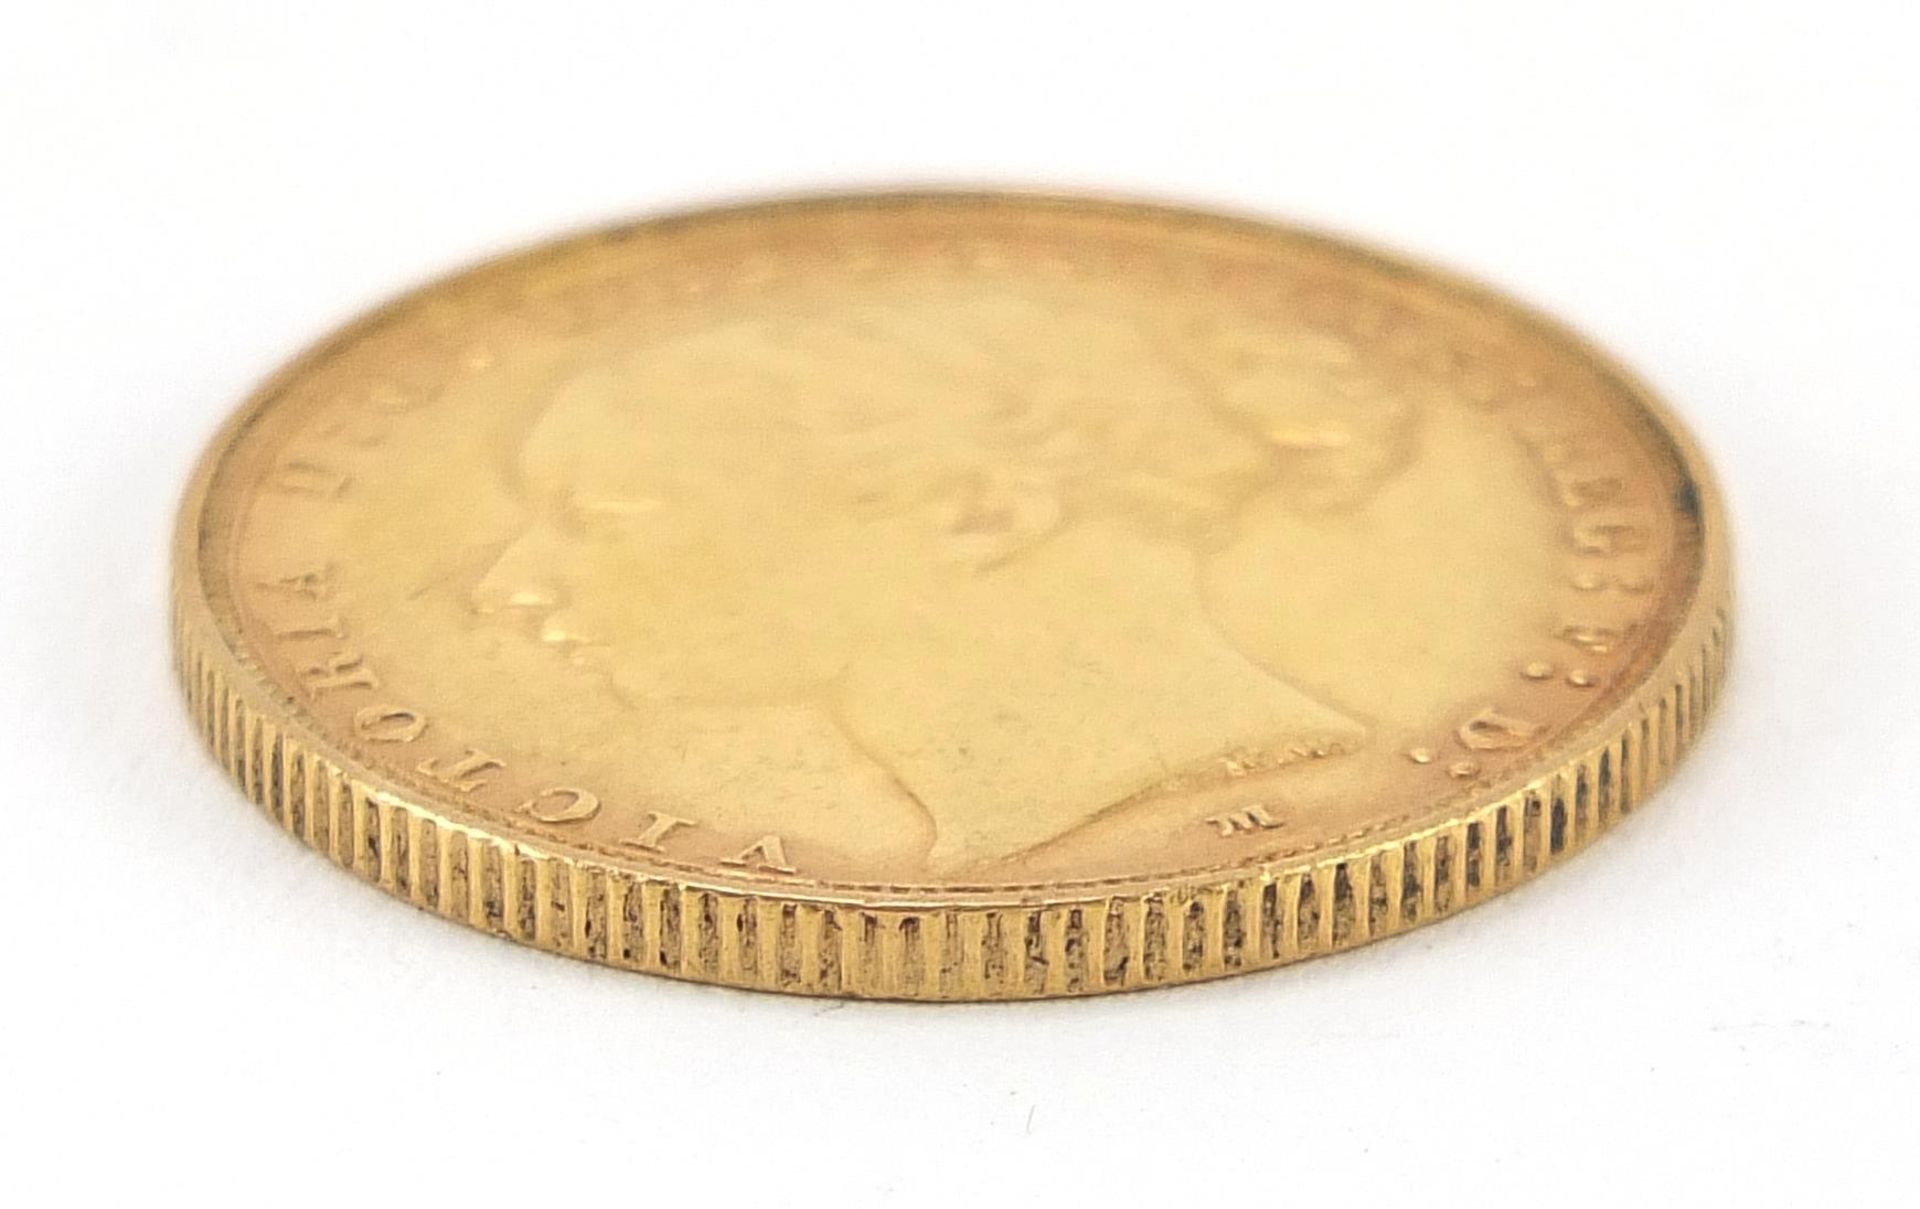 Queen Victoria Young Head 1886 gold sovereign, Melbourne mint - this lot is sold without buyer's pr - Image 3 of 3